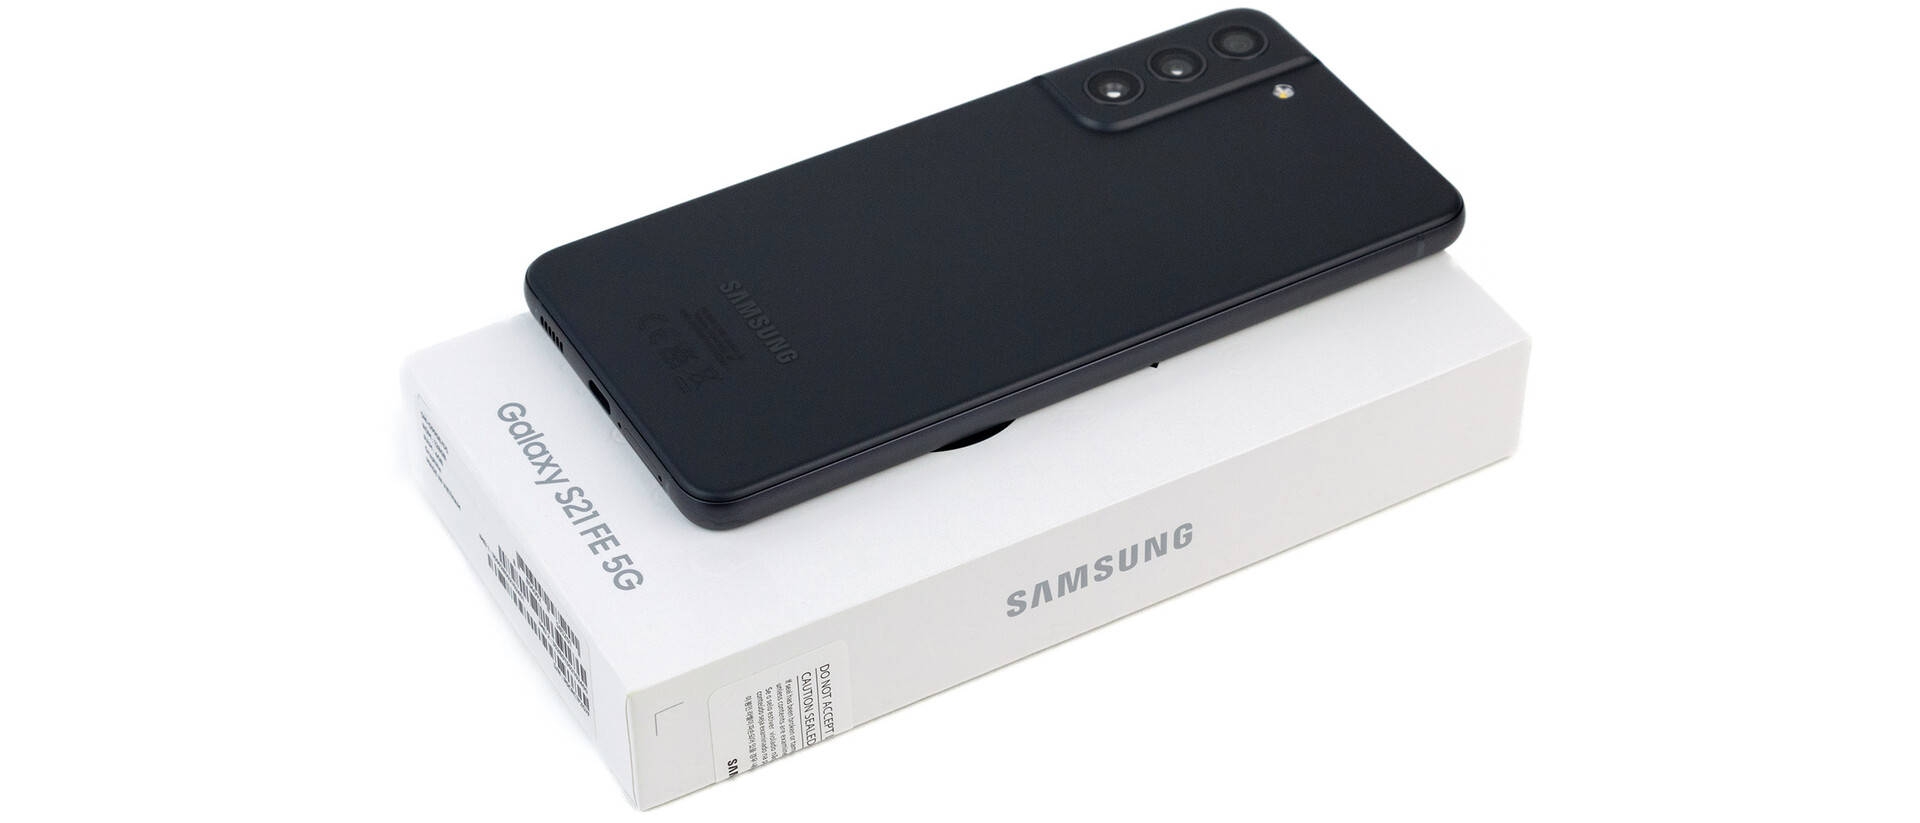 Samsung Galaxy S23 FE tipped to arrive in Snapdragon 8 Gen 2 and Exynos  2200 flavours -  News